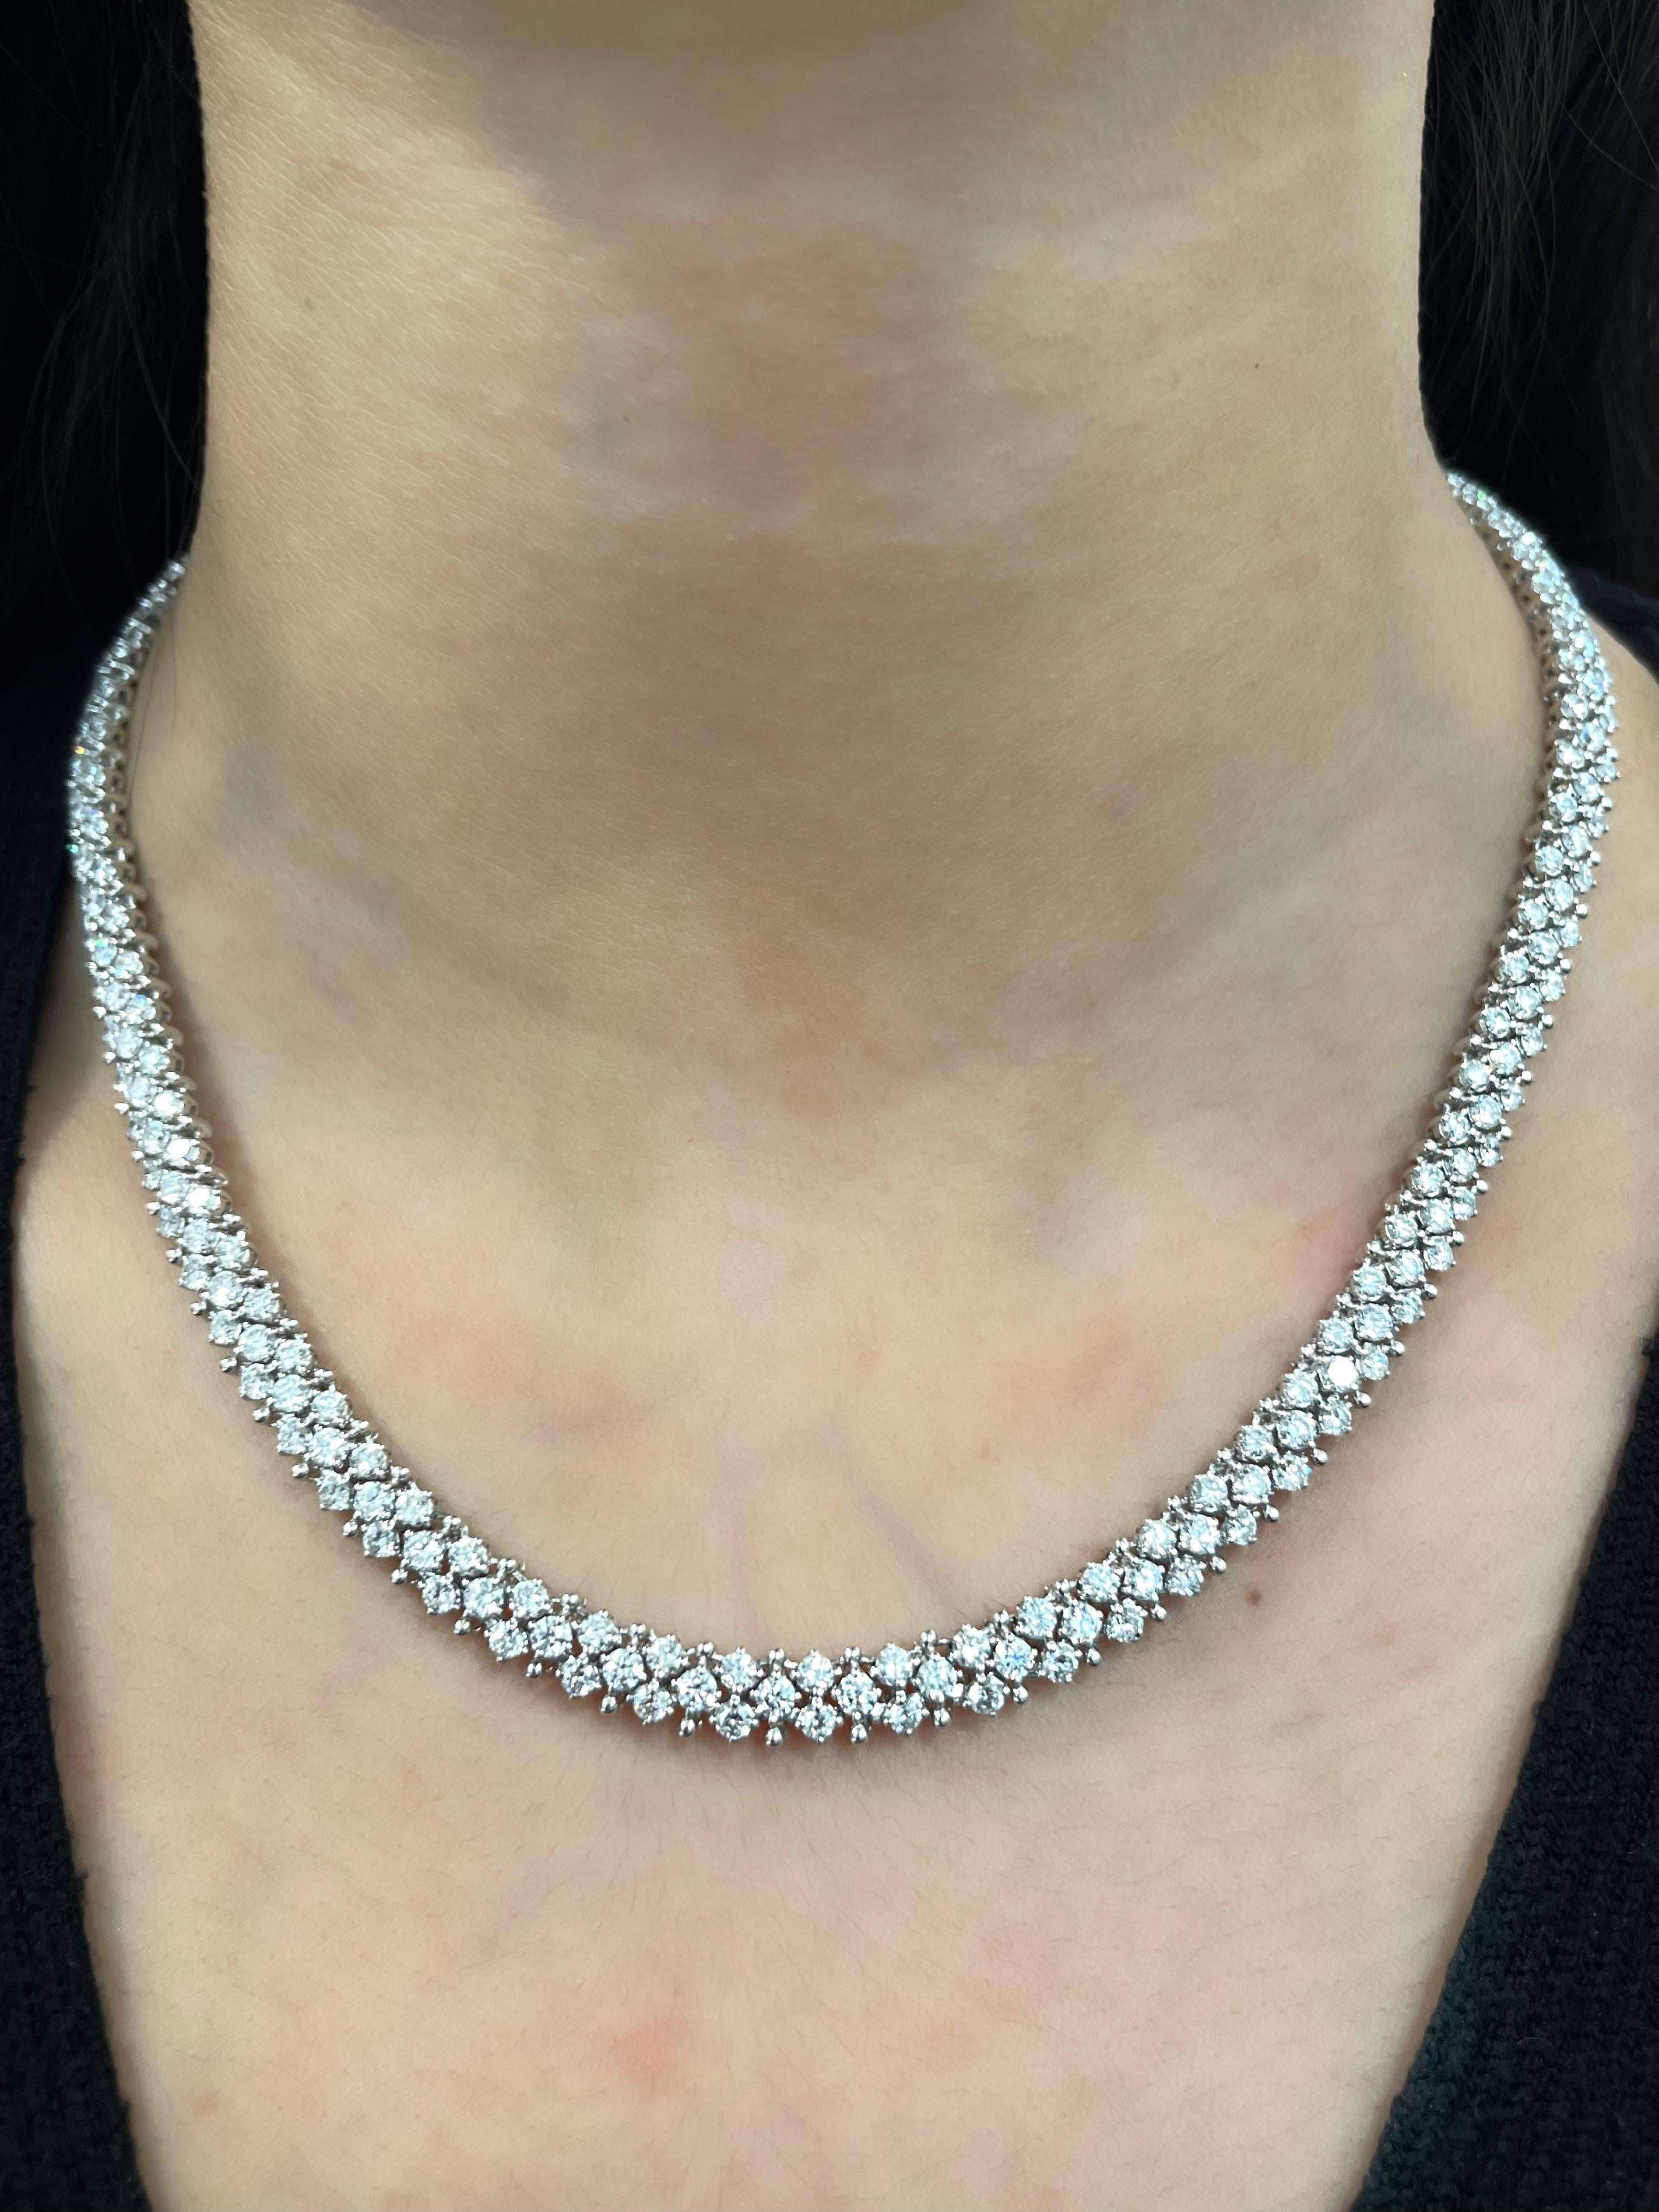 Introducing our breathtaking 13.29 ct pave diamond necklace, a true masterpiece that will leave you in awe. Each diamond has been meticulously selected and set in a way that maximizes its brilliance and fire, resulting in an unparalleled level of